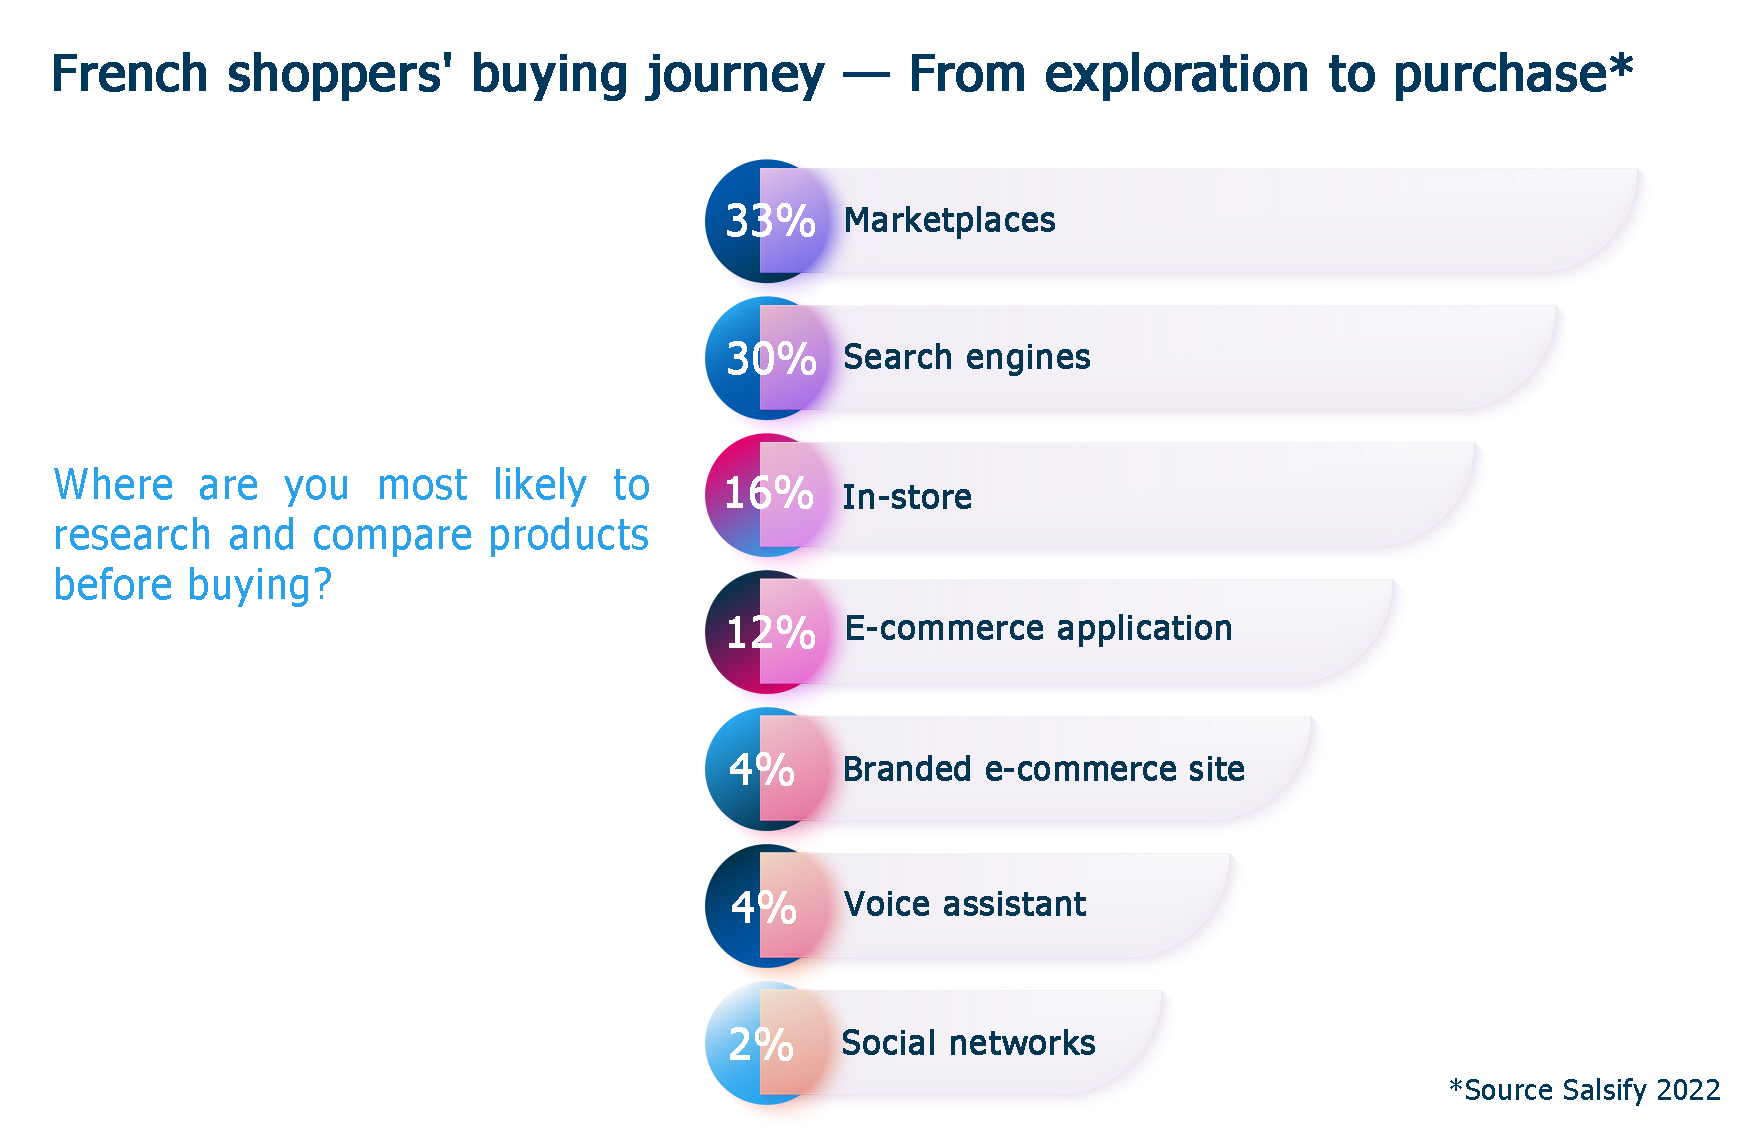 French shoppers' buying journey | research products before buying